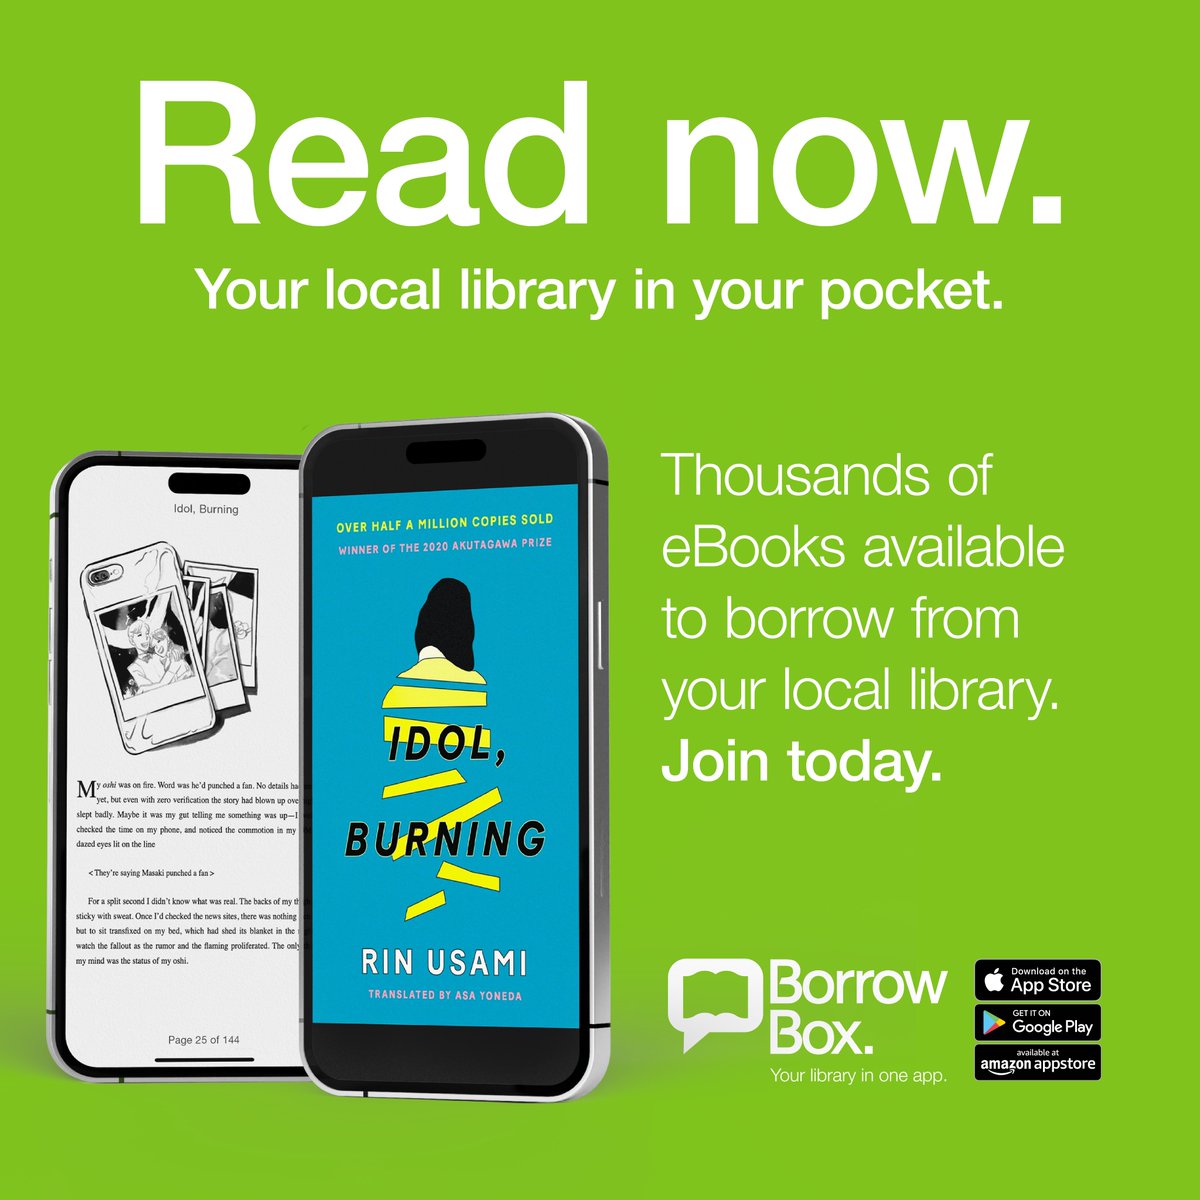 Staff-pick Saturday! 📚
Every week we want to bring you a book that one of our staff wants to recommend. This week we have 'Idol, Burning' by Rin Usami.
The eBook and eAudiobook versions are now available on our #Borrowbox app.
#AlwaysOpen #ListenNow #ReadNow